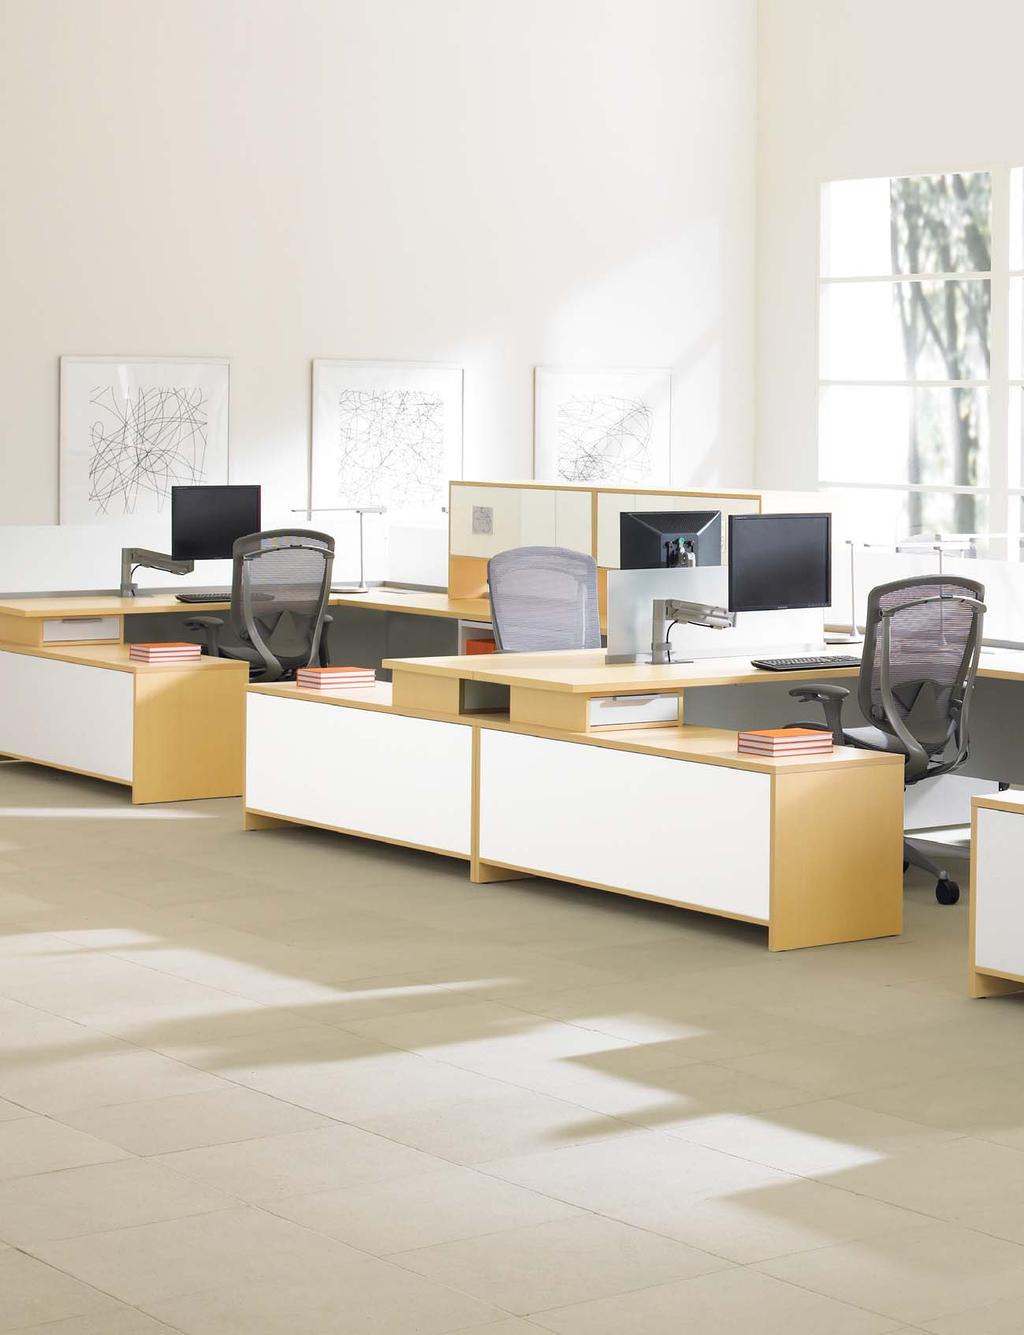 The foundation of Expansion Desking spaces when planned with low storage, glass comprises the Spine Desk and Modular Desk options and